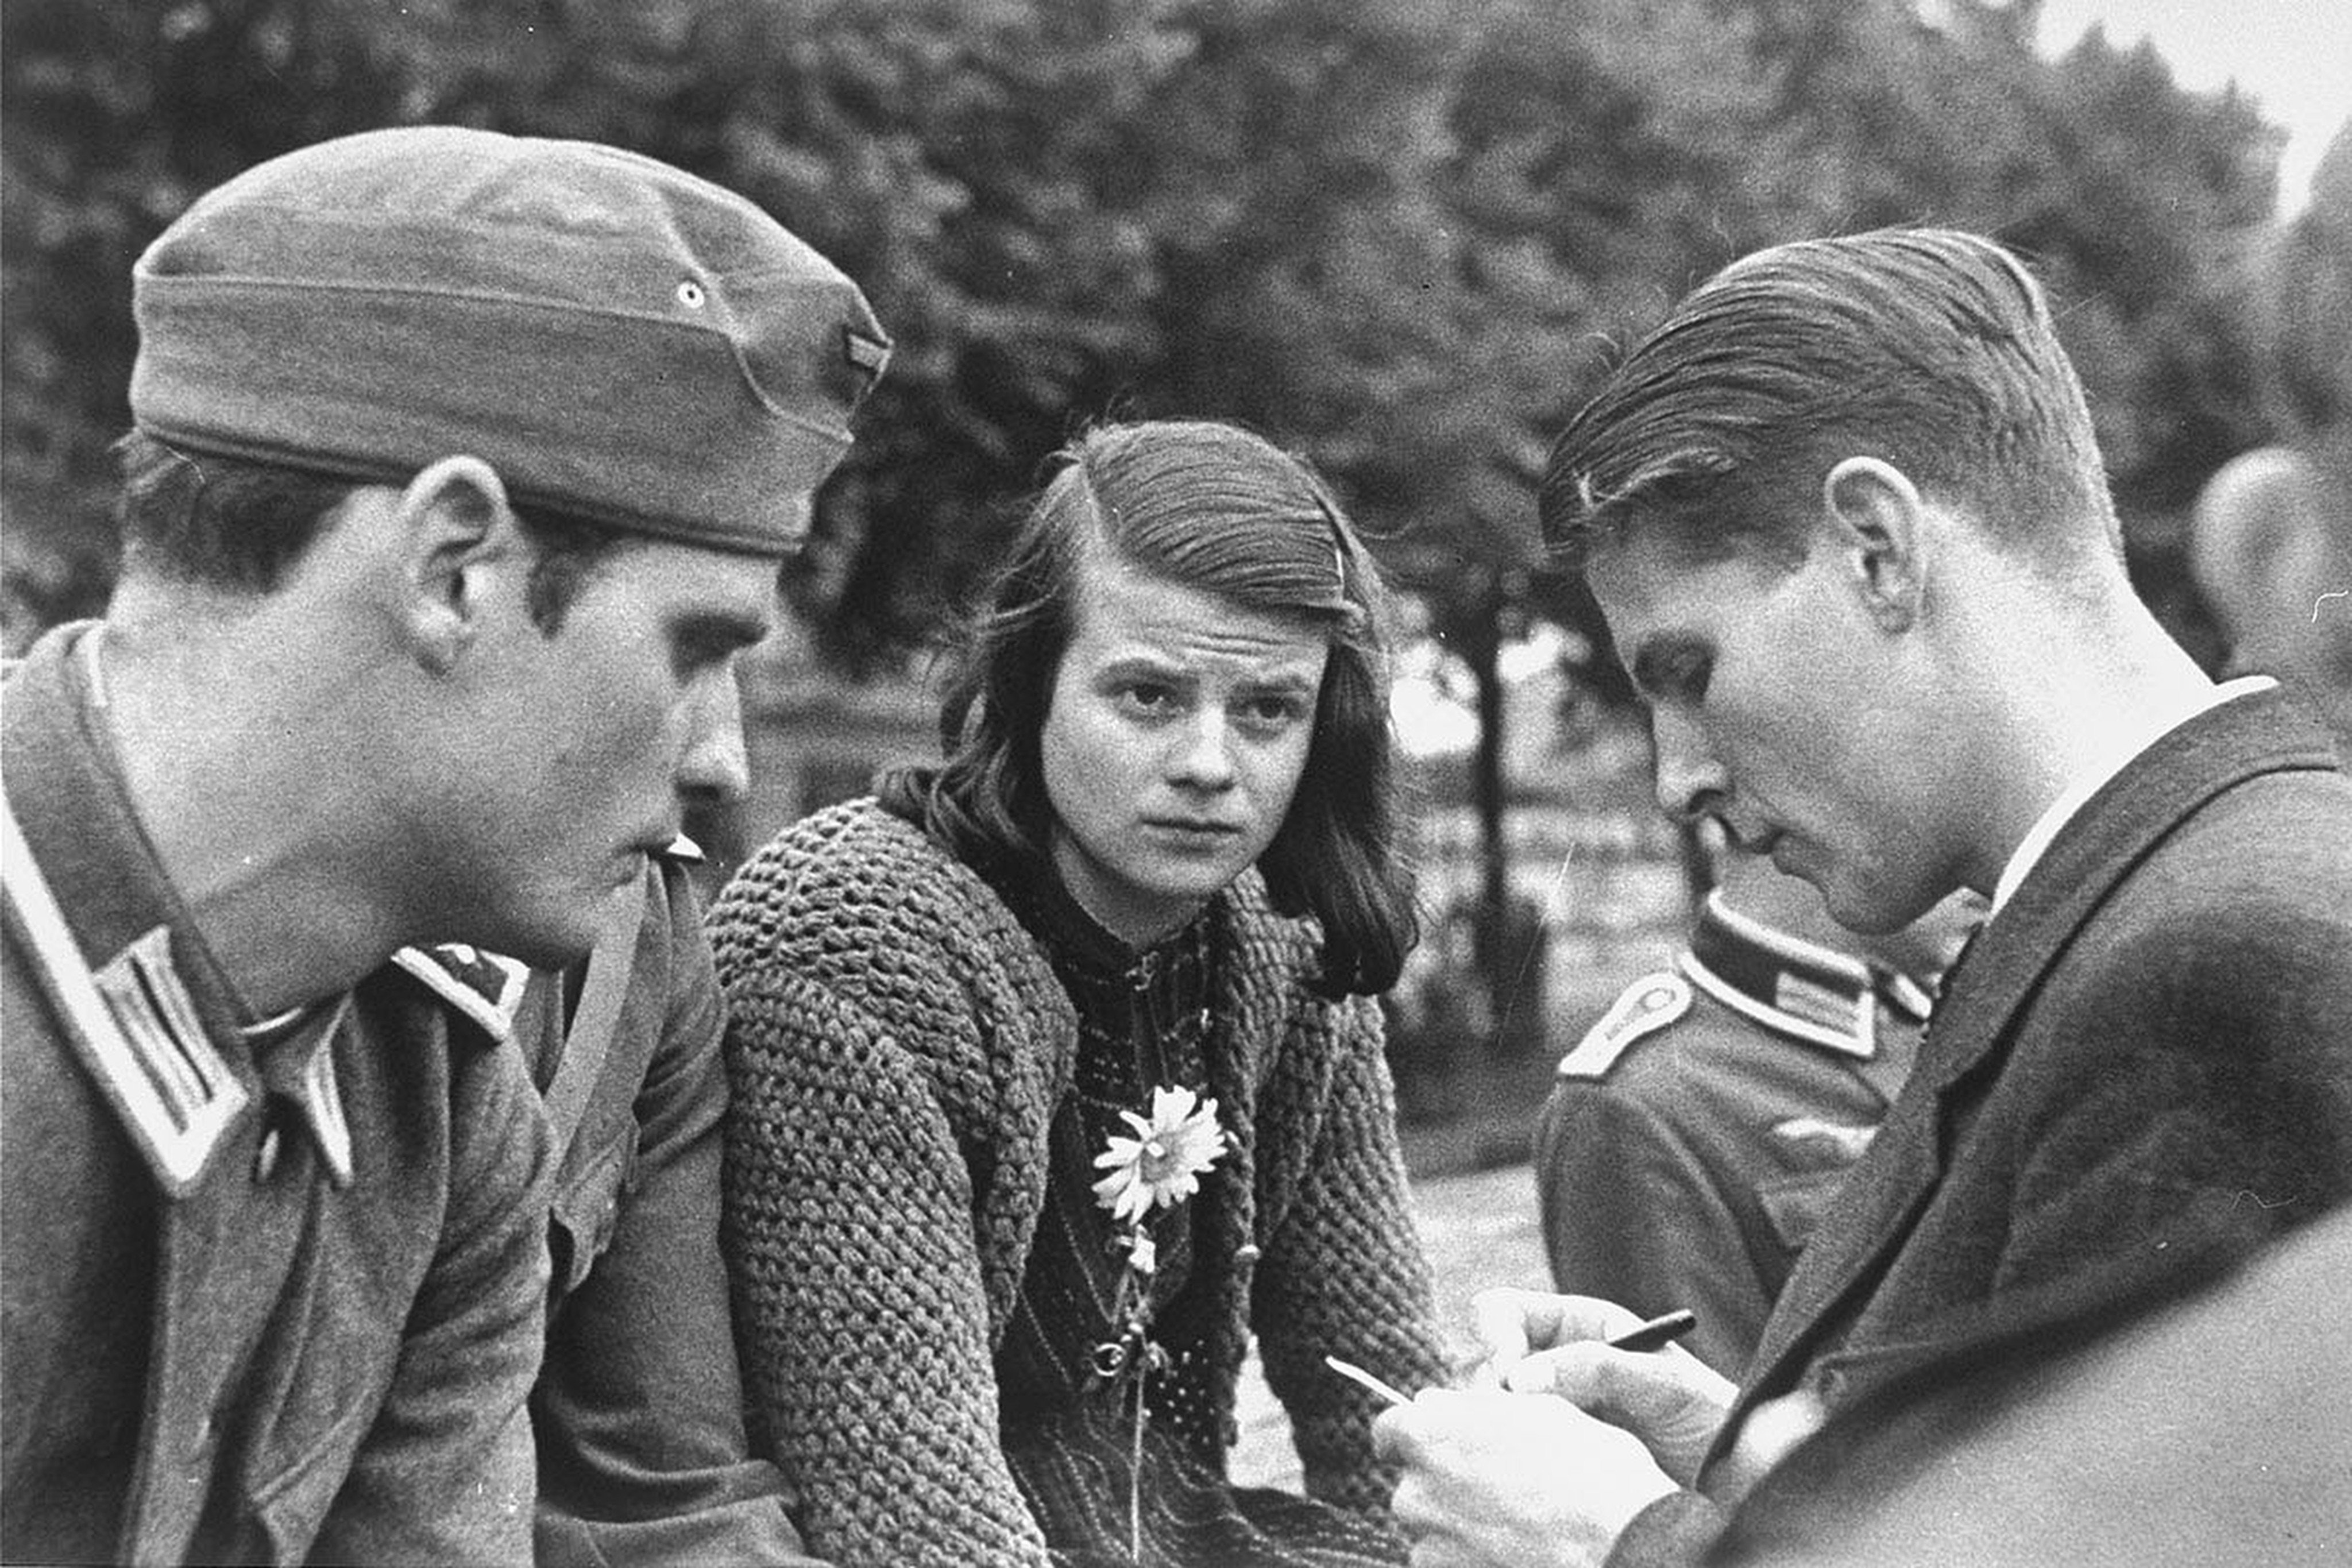 Hans Scholl, Sophie Scholl and Christoph Probst, three of the ringleaders of the White Rose resistance group in Nazi Germany who were convicted of treason and executed. Facebook@History Cool Kids